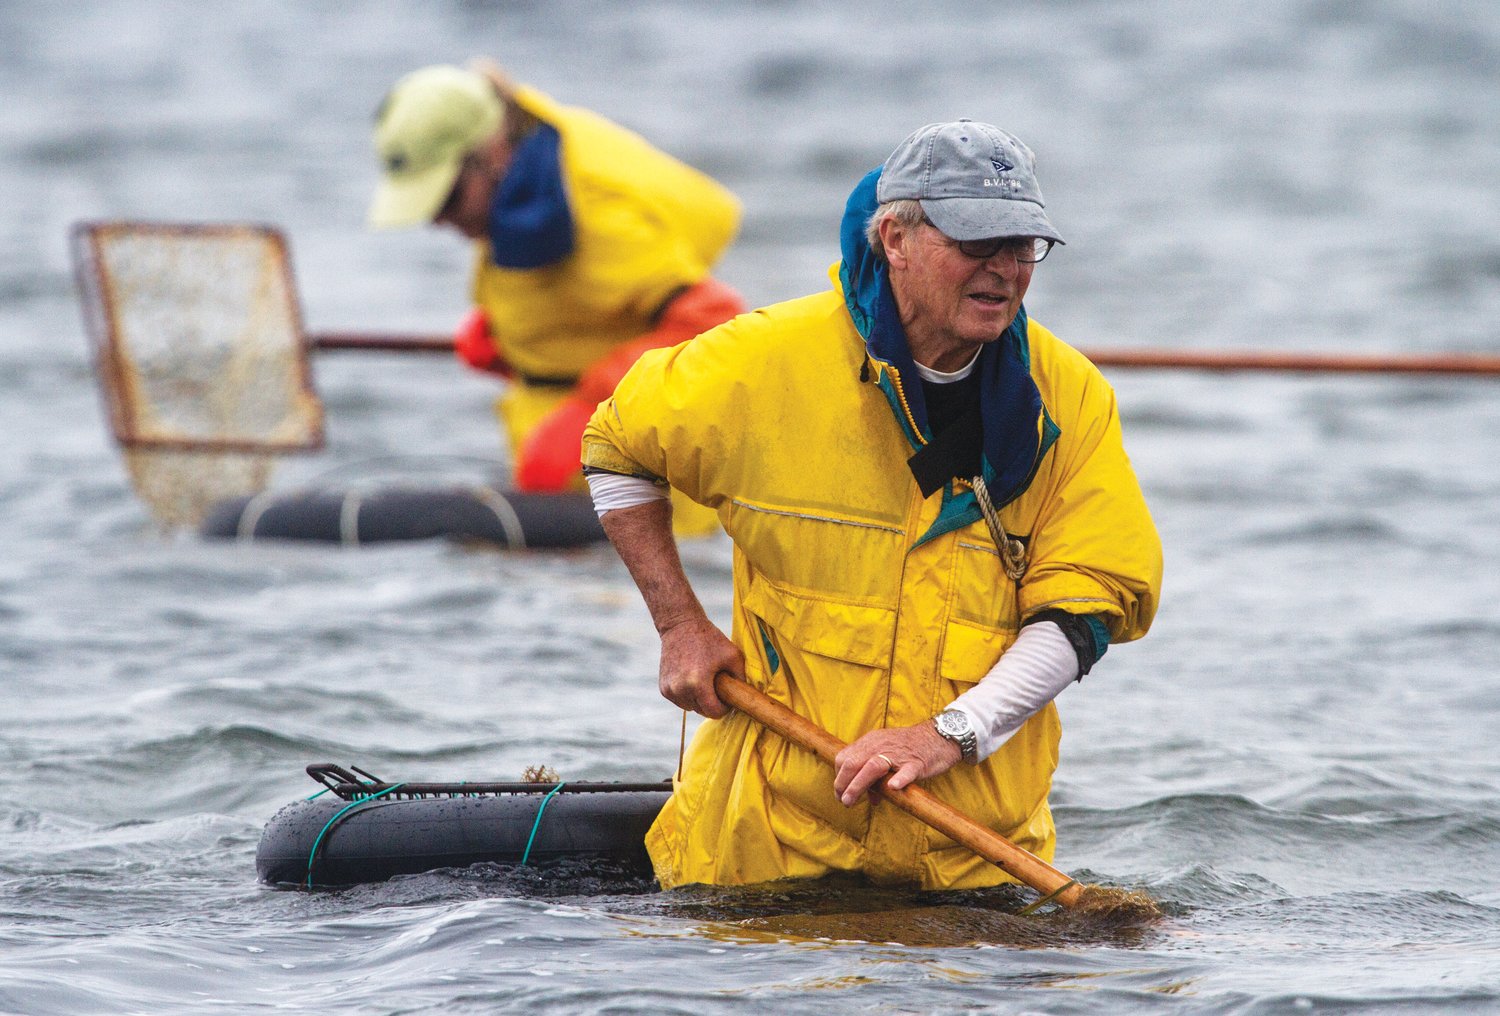 Oct. 1 is the first day of family scalloping season. In this photo taken in 2014, Martin McKerrow fishes for a mess of scallops.